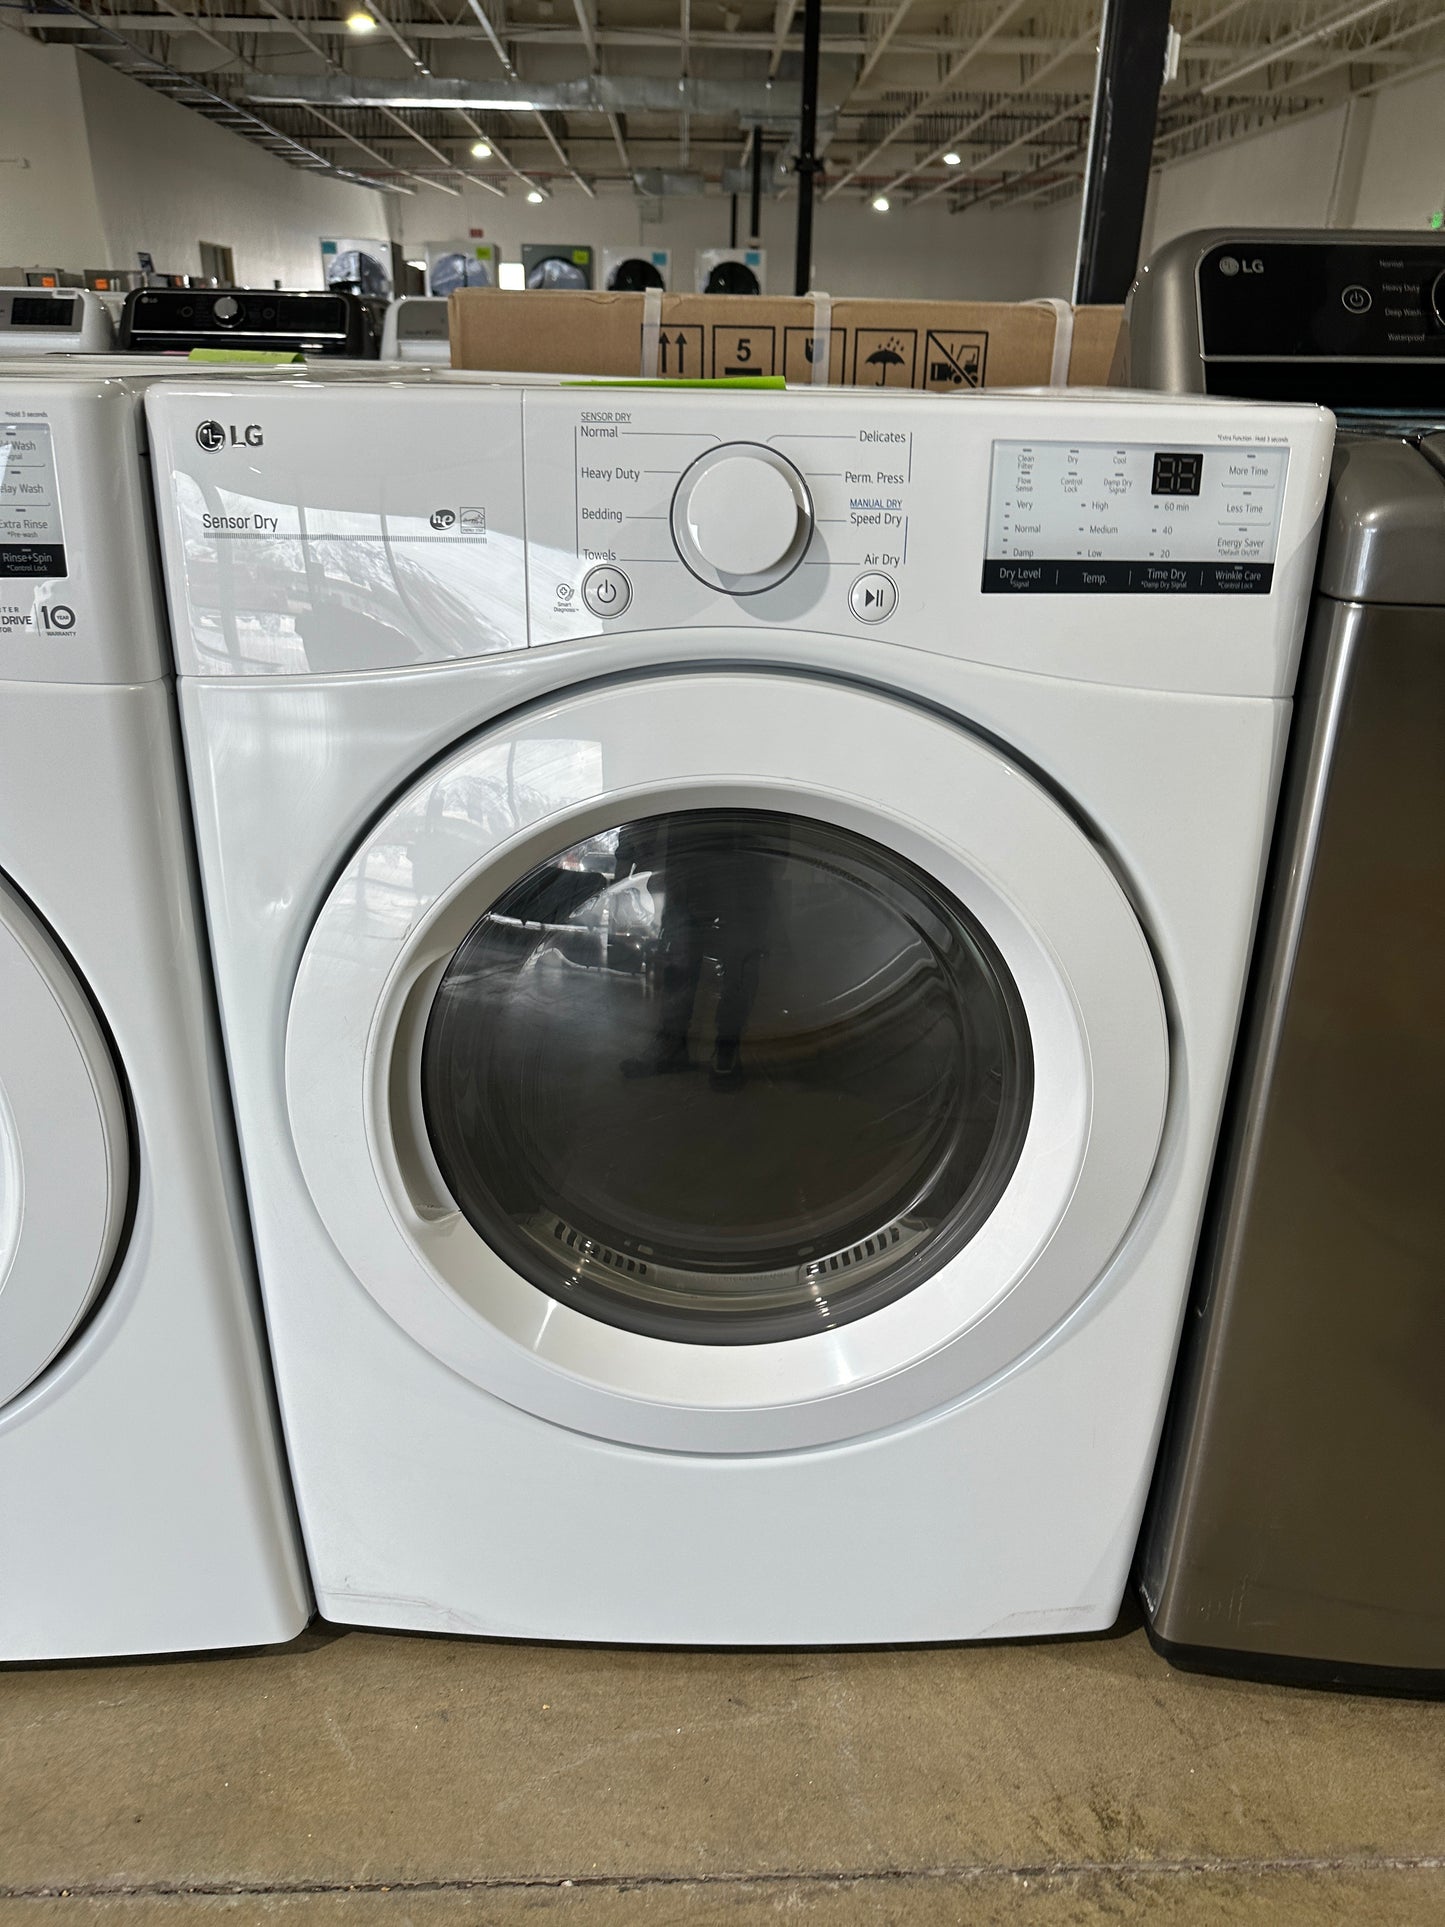 STACKABLE GAS LG DRYER - DRY11240S DLG3401W